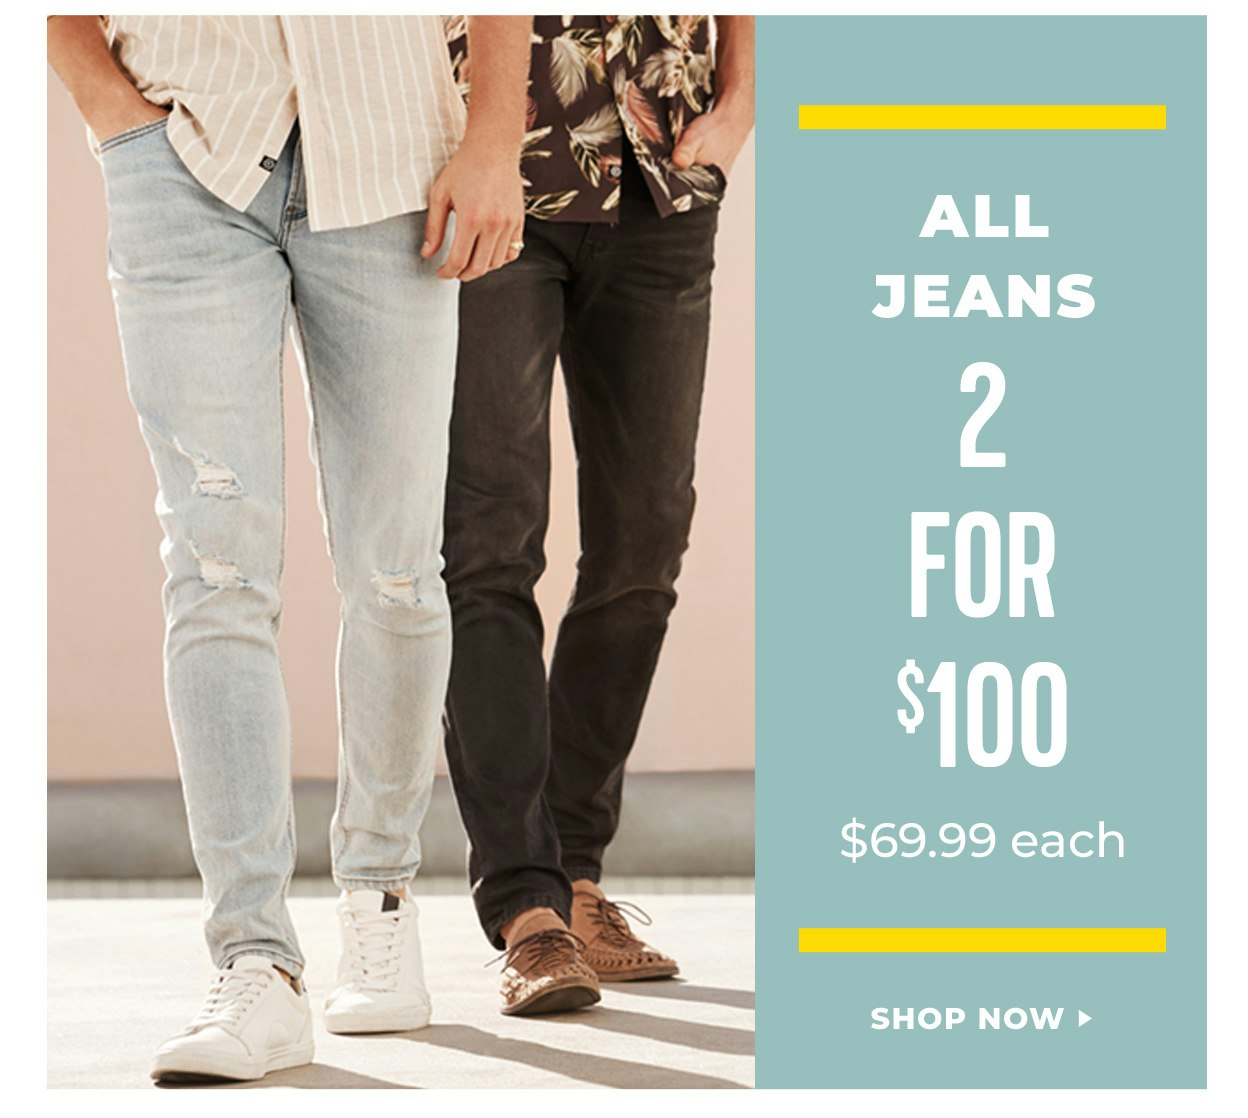 2 for $100 Jeans